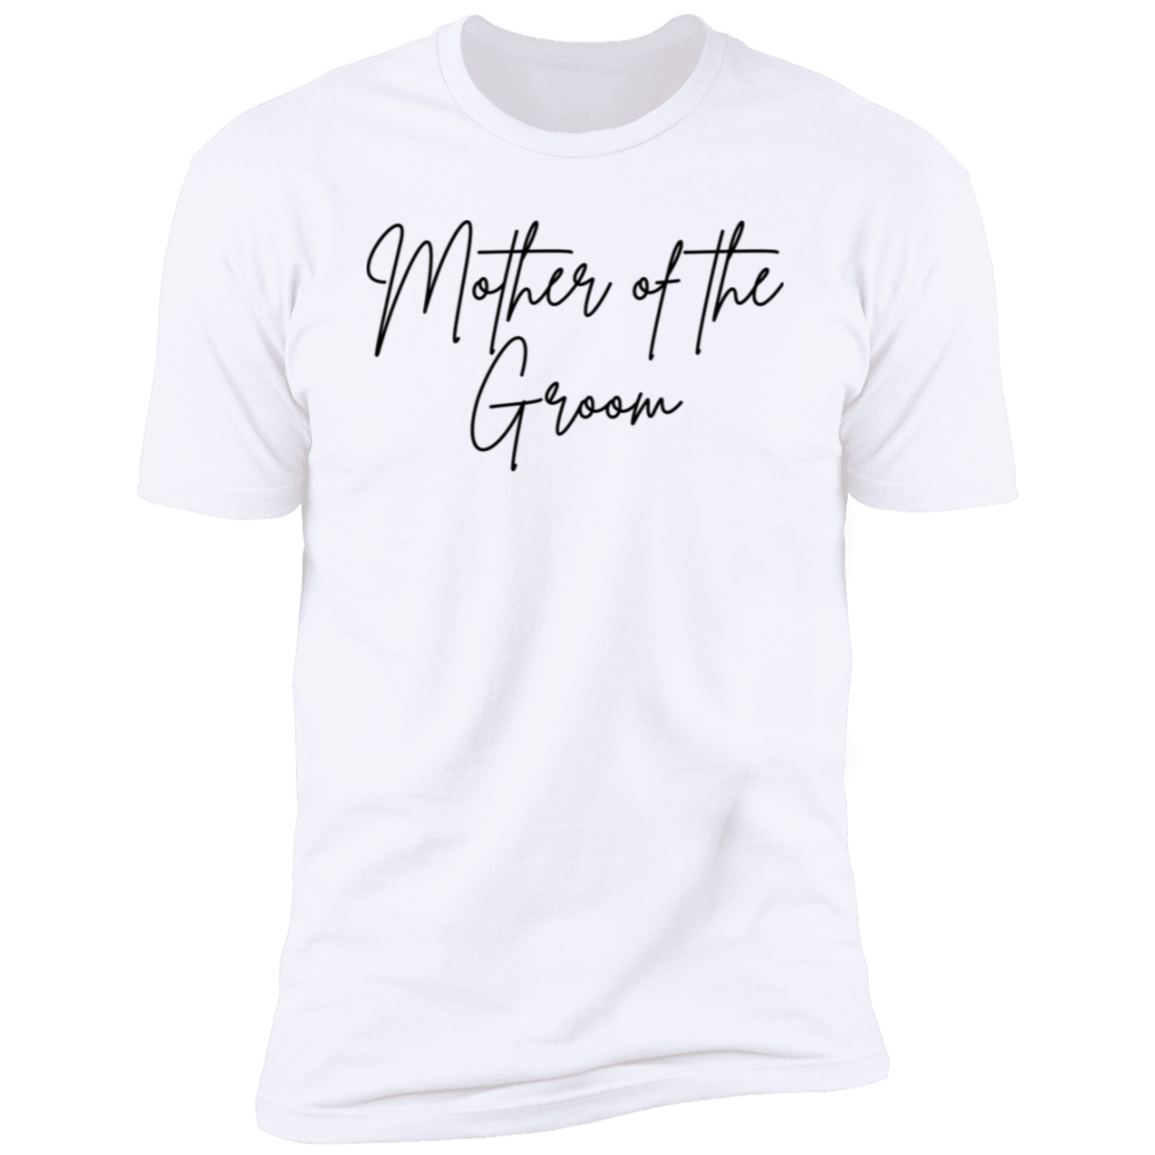 3 Mother of the Groom T-Shirt